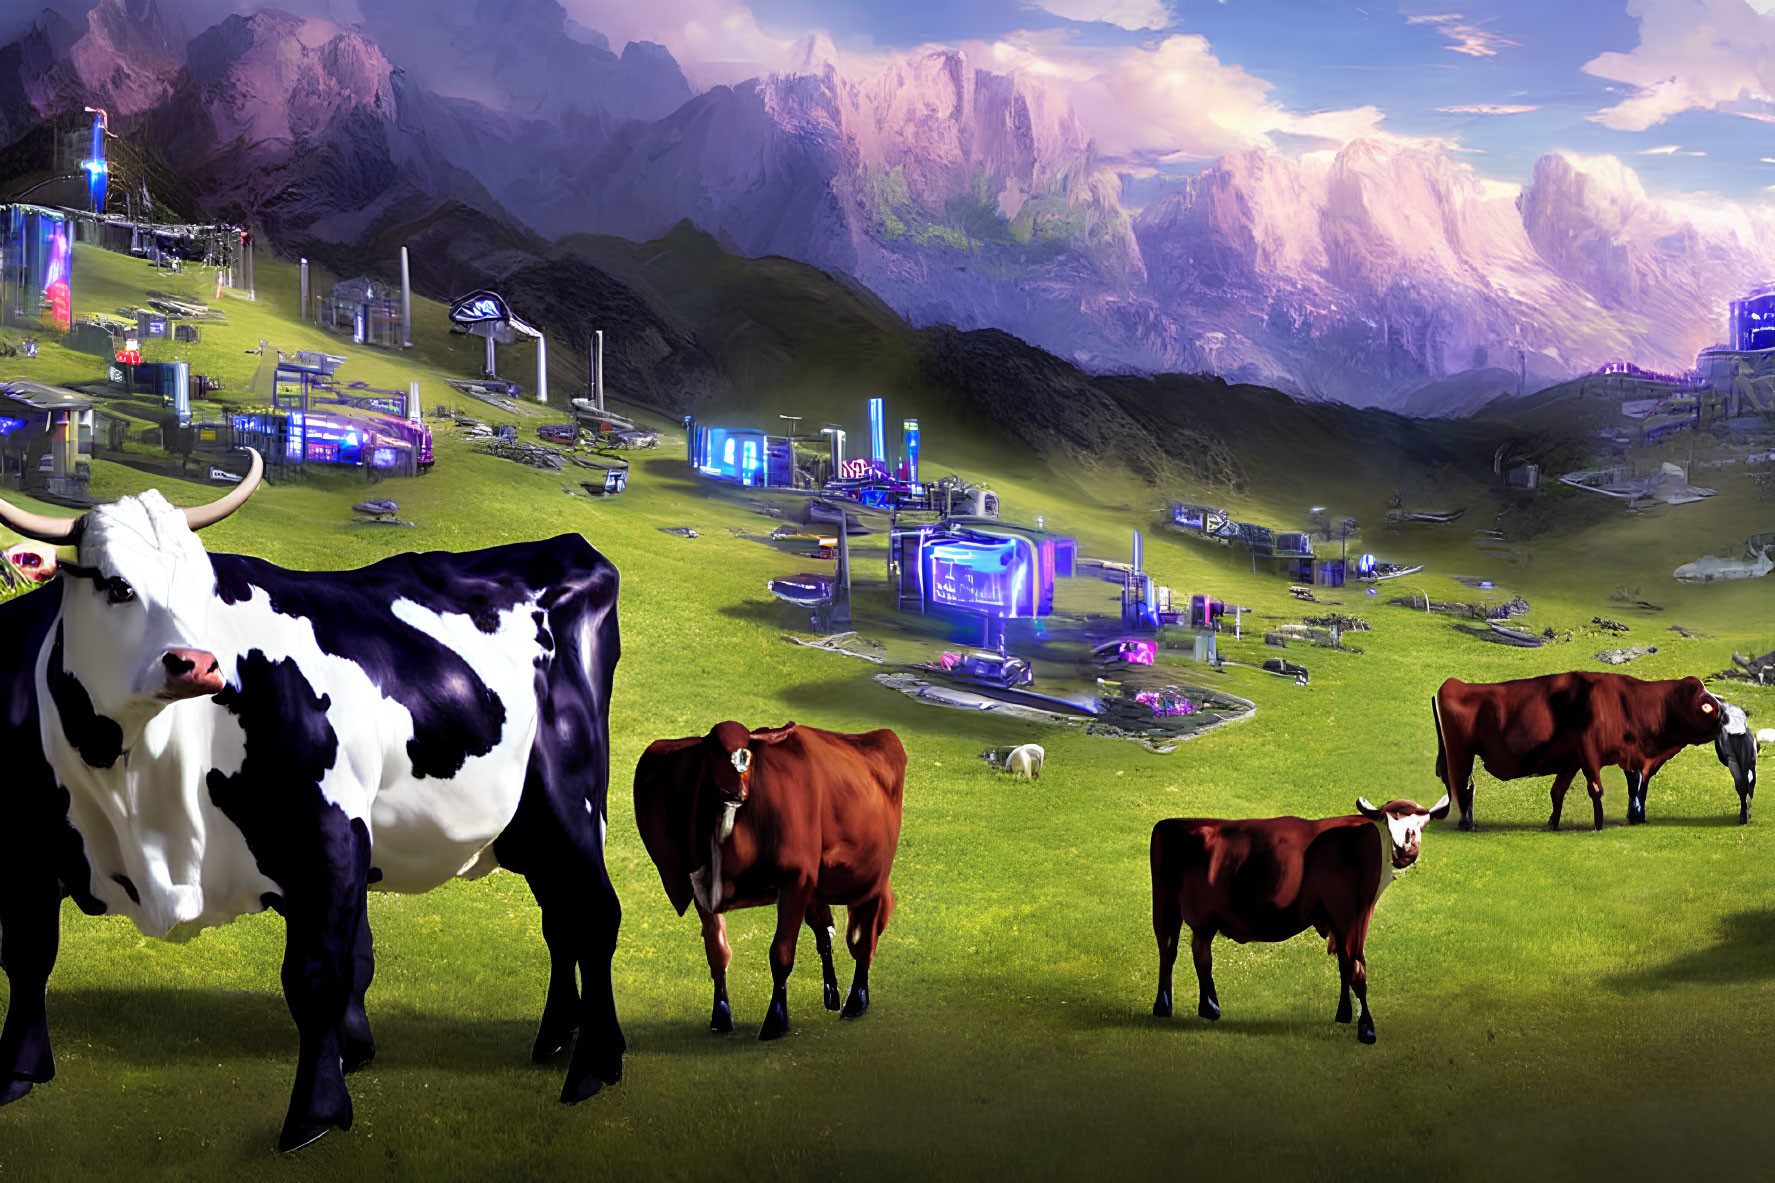 Futuristic alpine meadow with cows grazing and modern structures